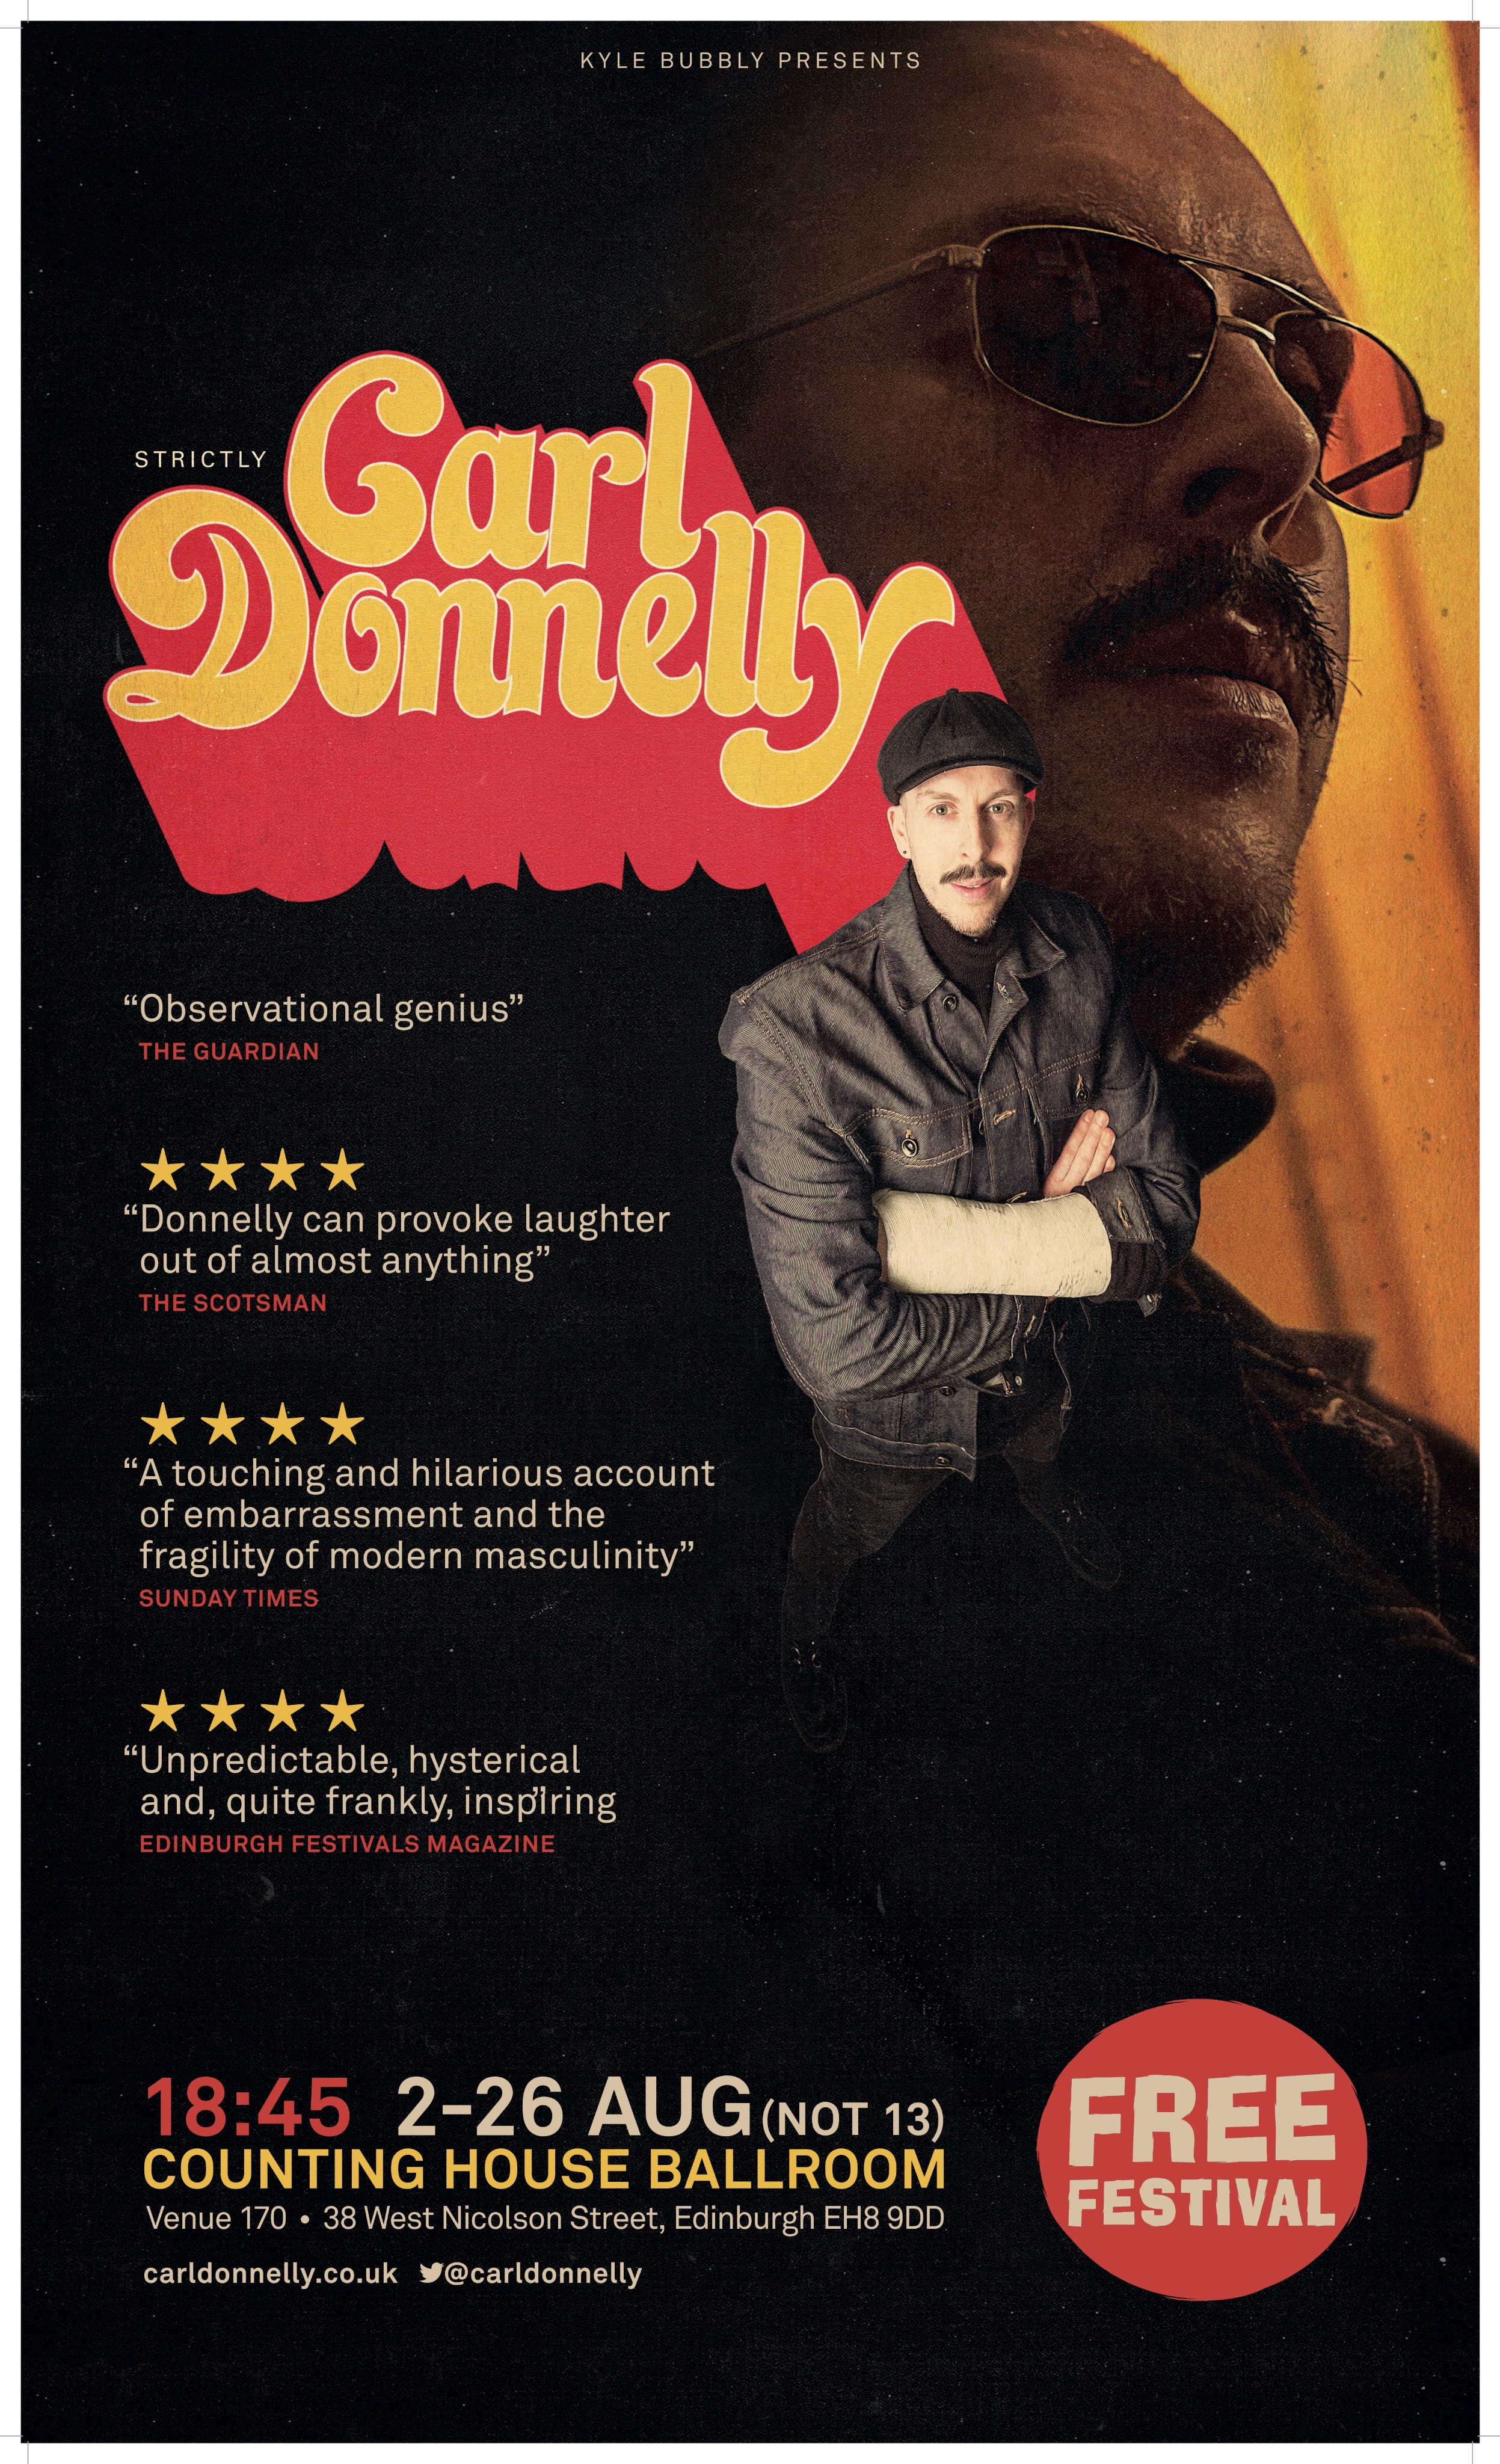 The poster for Strictly Carl Donnelly!